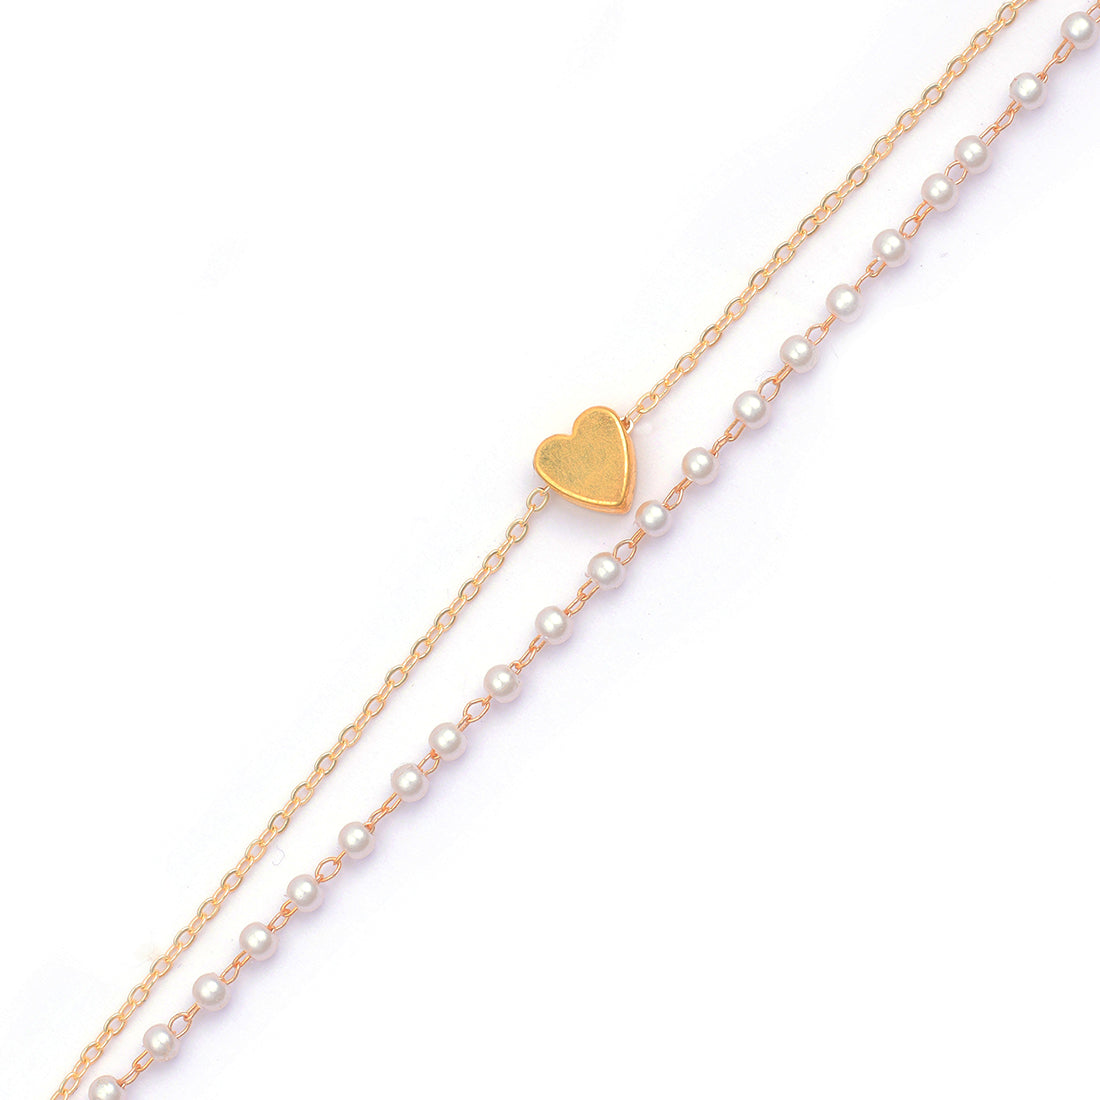 Two-Layered Bracelet: Gold-Toned Heart Chain & Seed Pearls Strand